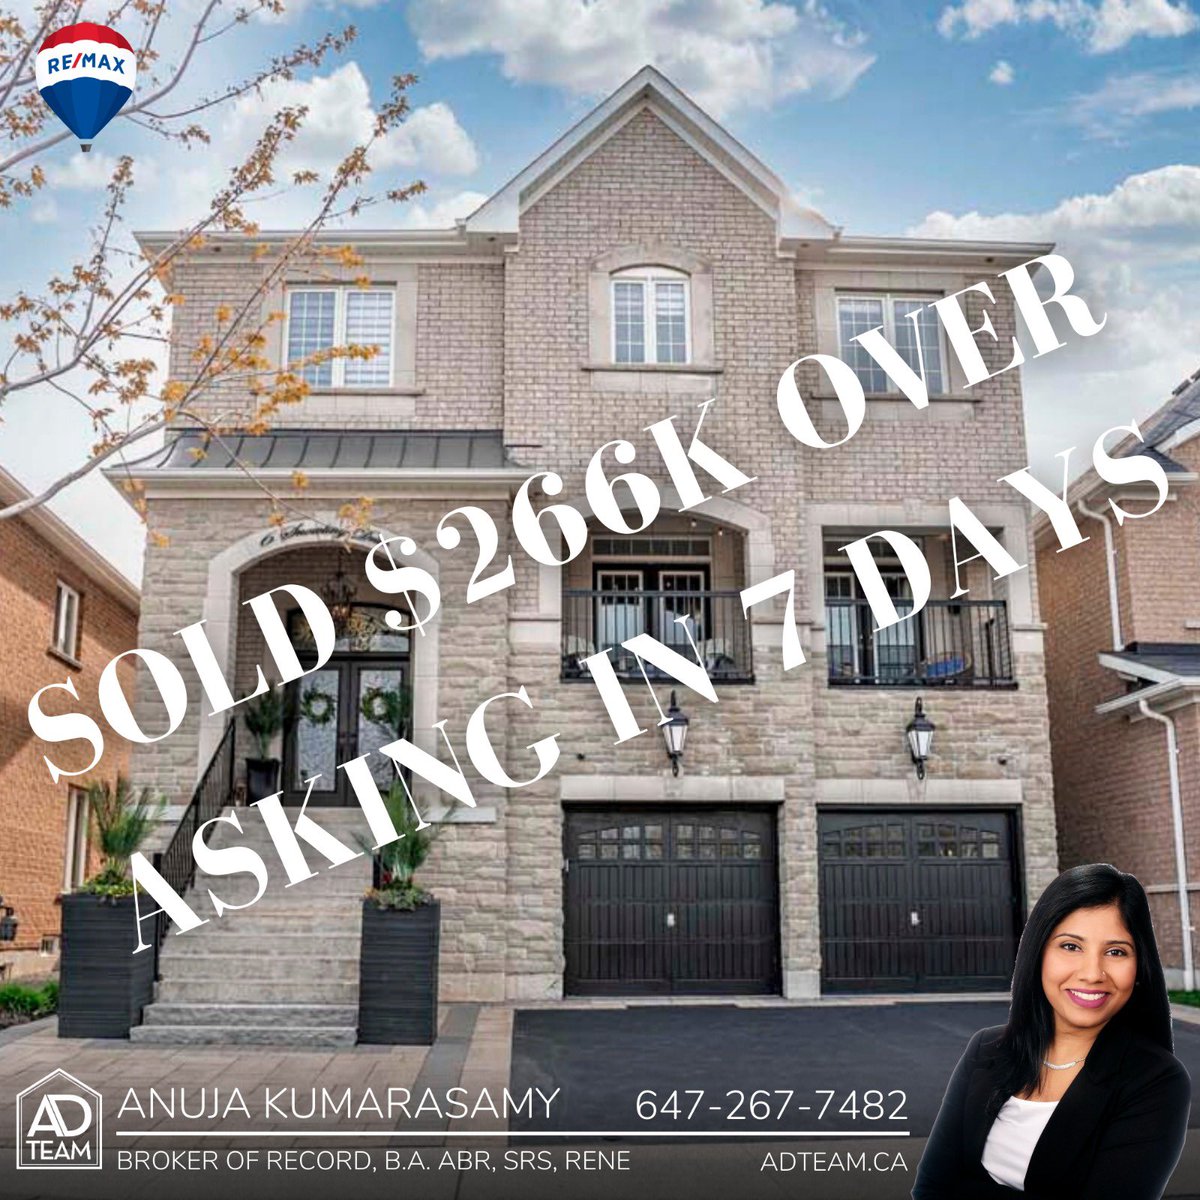 🔥🔥SOLD $266K OVER ASKING IN 7 DAYS🔥🔥

Please don't hesitate to contact us.

☎️ 647-267-7482
✉️ anuja@adteam.ca
🌎 adteam.ca

#SoldOverAsking #Sold #SoldByAnuja #RecordBreakingSale #DreamHomeAchieved #RealEstateVictory #Ajax #AdTeam #AnujaTheRealtor